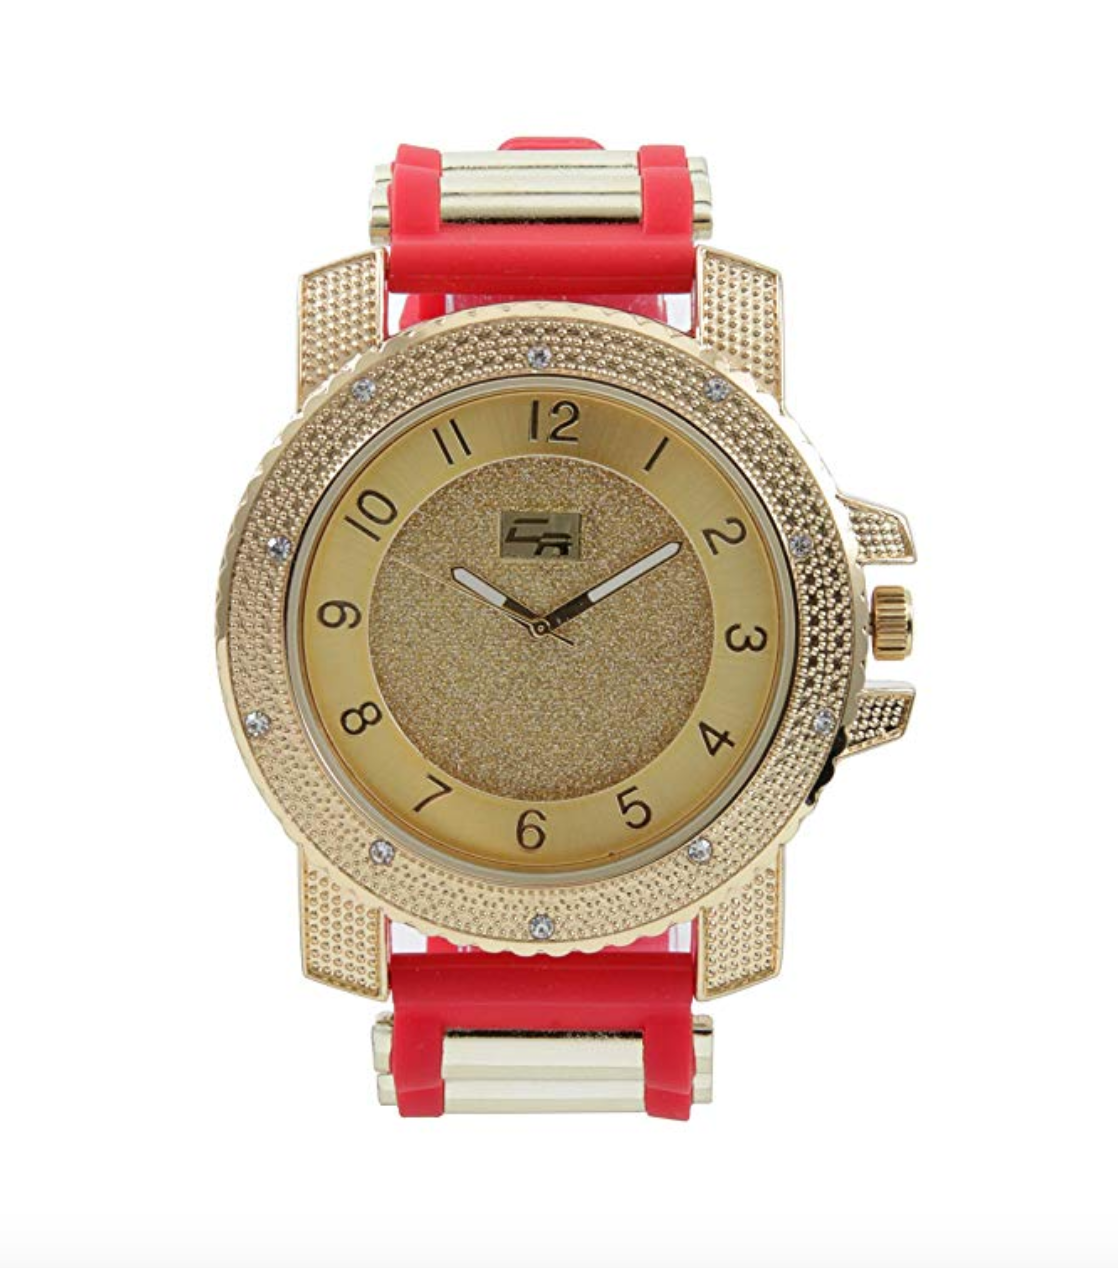 Big Face Bust Down Watch Hip Jewelry Red Band Watch Simulated Diamonds Big Face Gold Color Watch